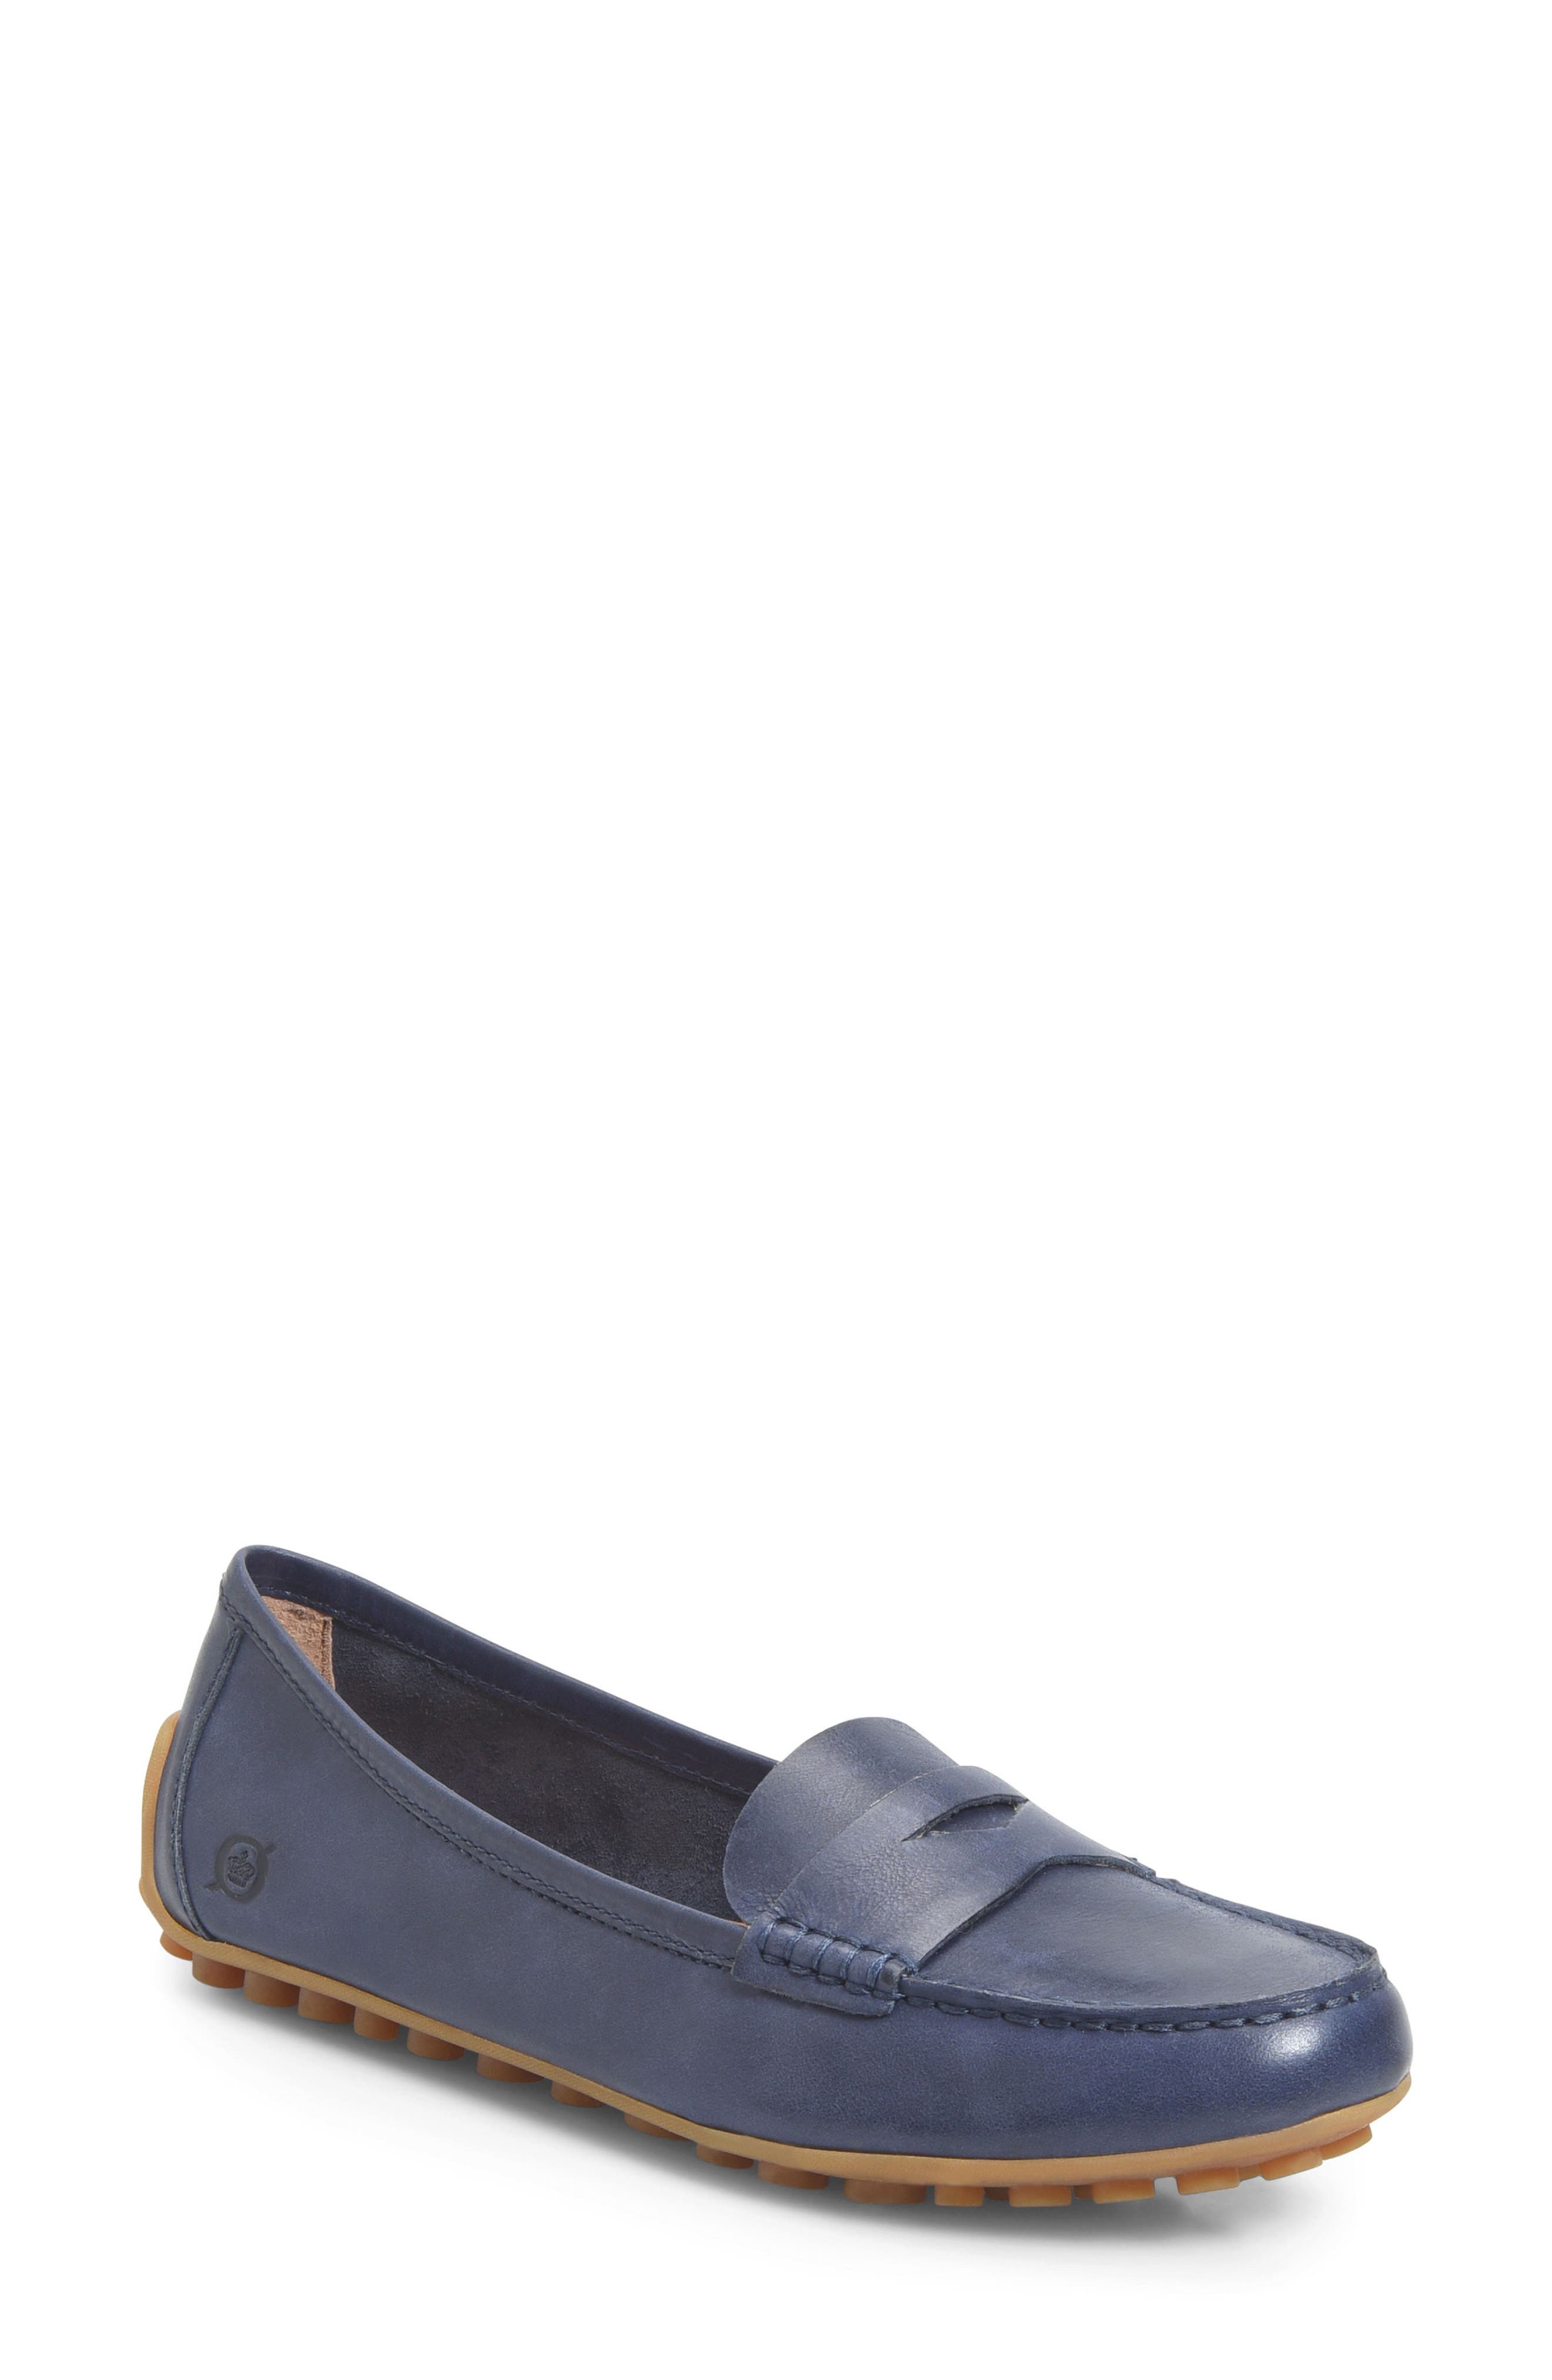 born loafers nordstrom